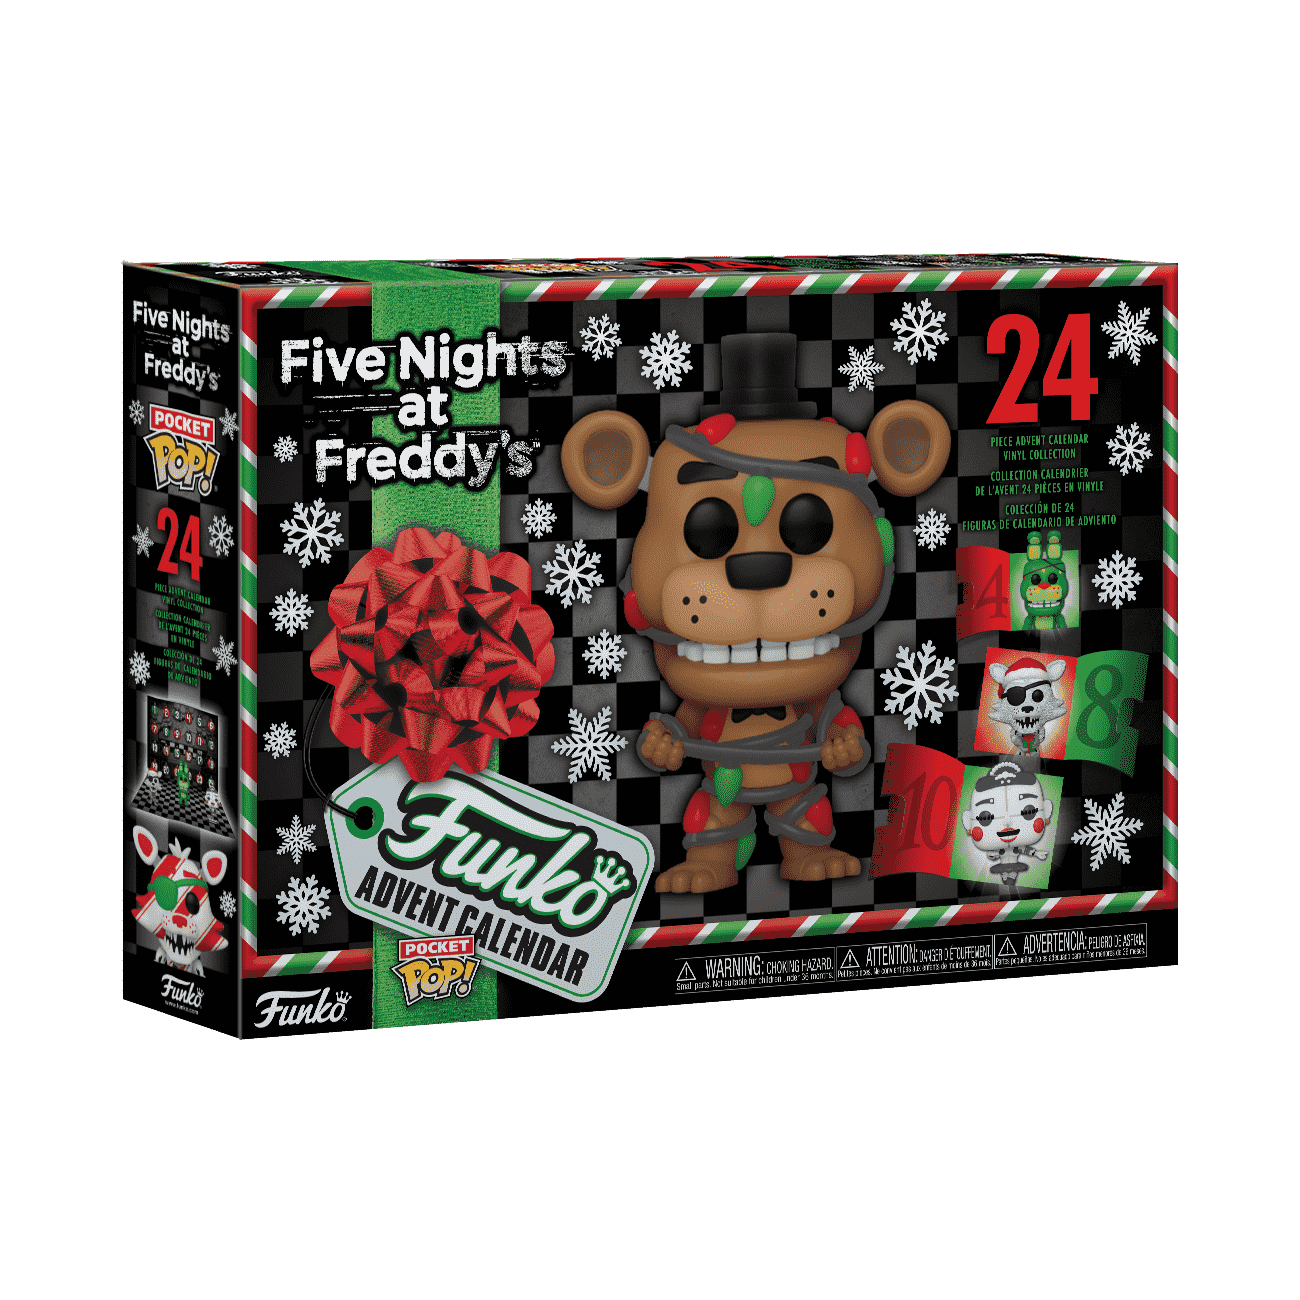 Buy Pocket Pop Five Nights at Freddy #39 s 24 Day Holiday Advent Calendar